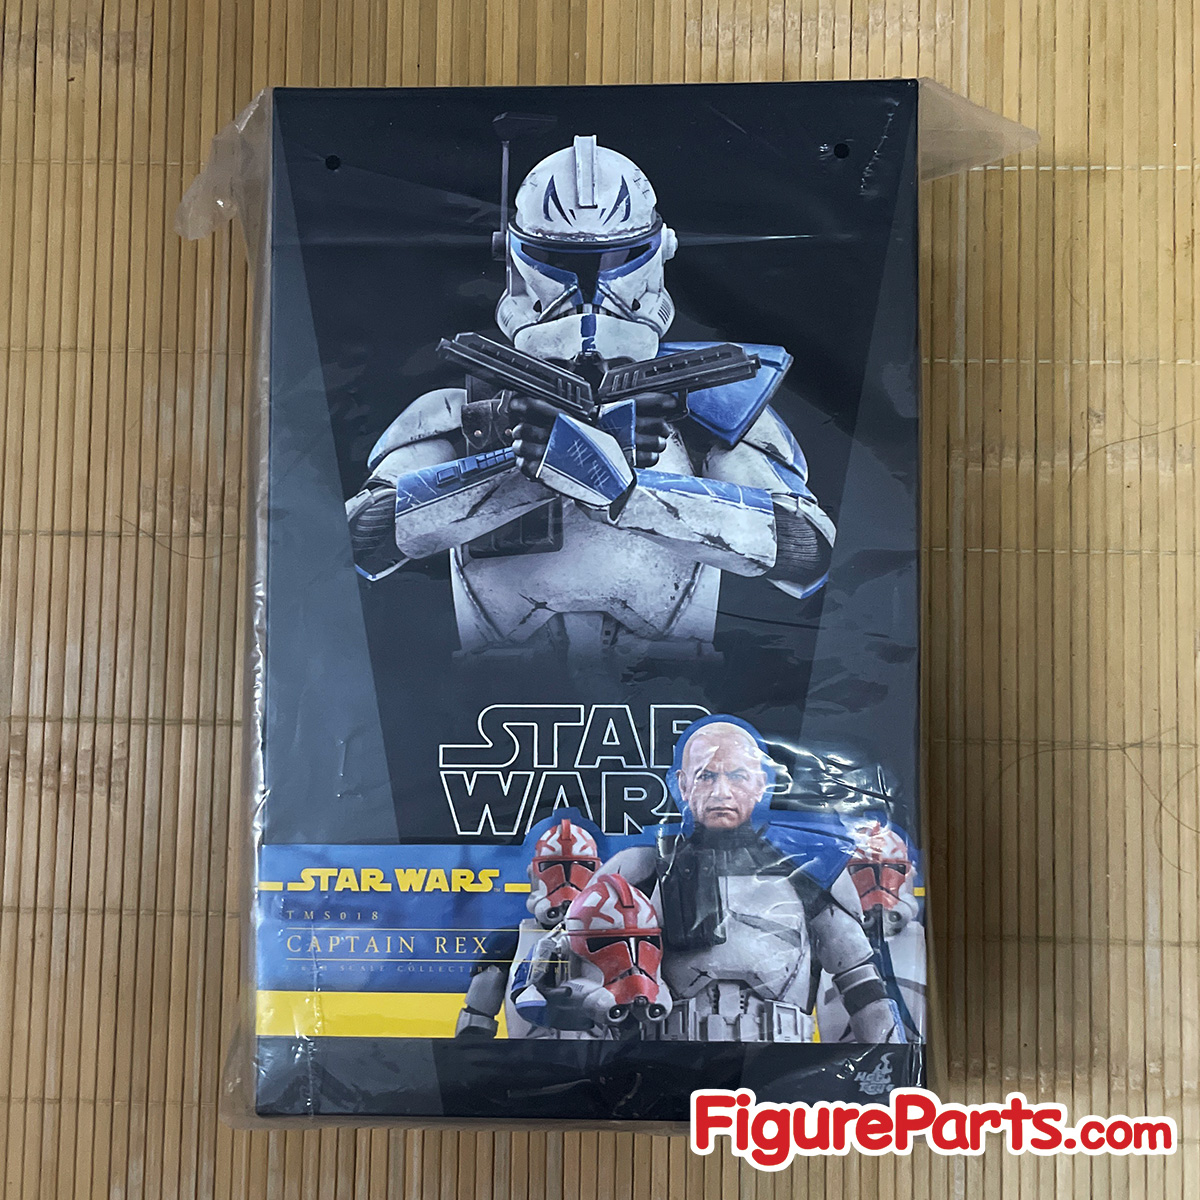 Captain Rex - Star Wars The Clone Wars - Hot Toys tms018